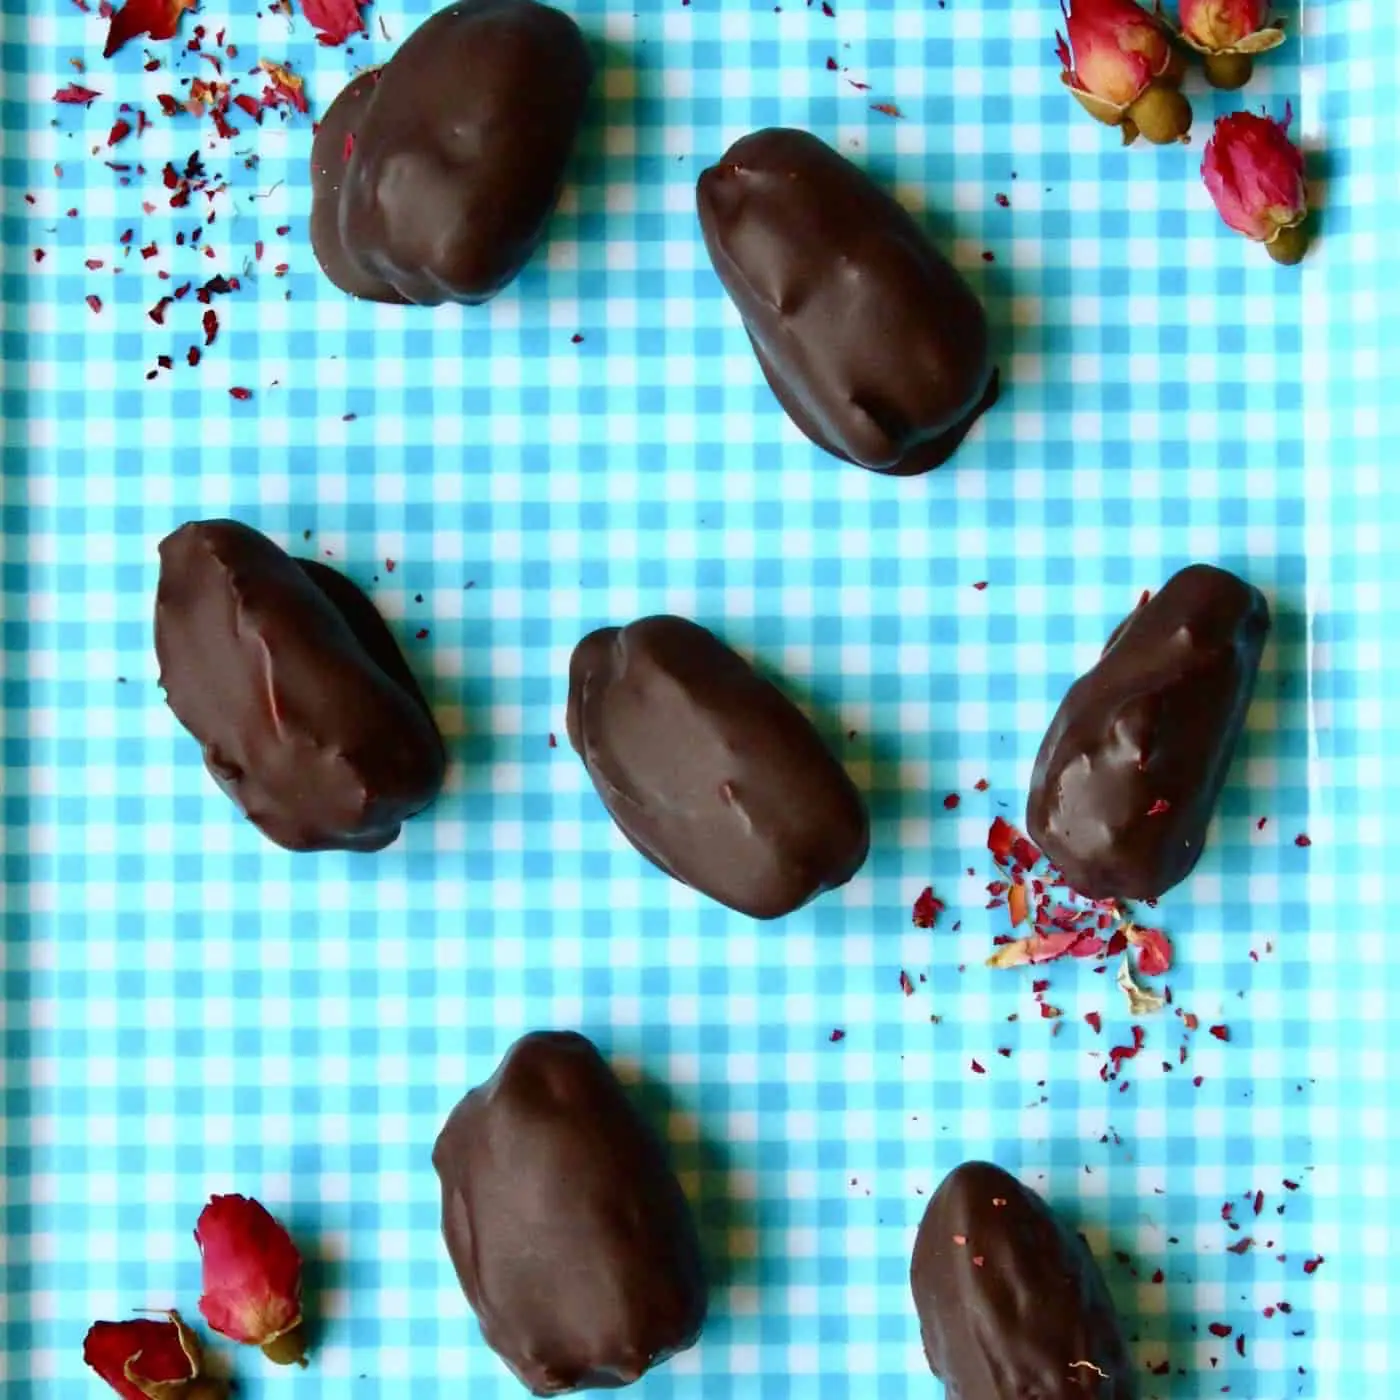 Seven chocolate-covered dates against a blue checked background